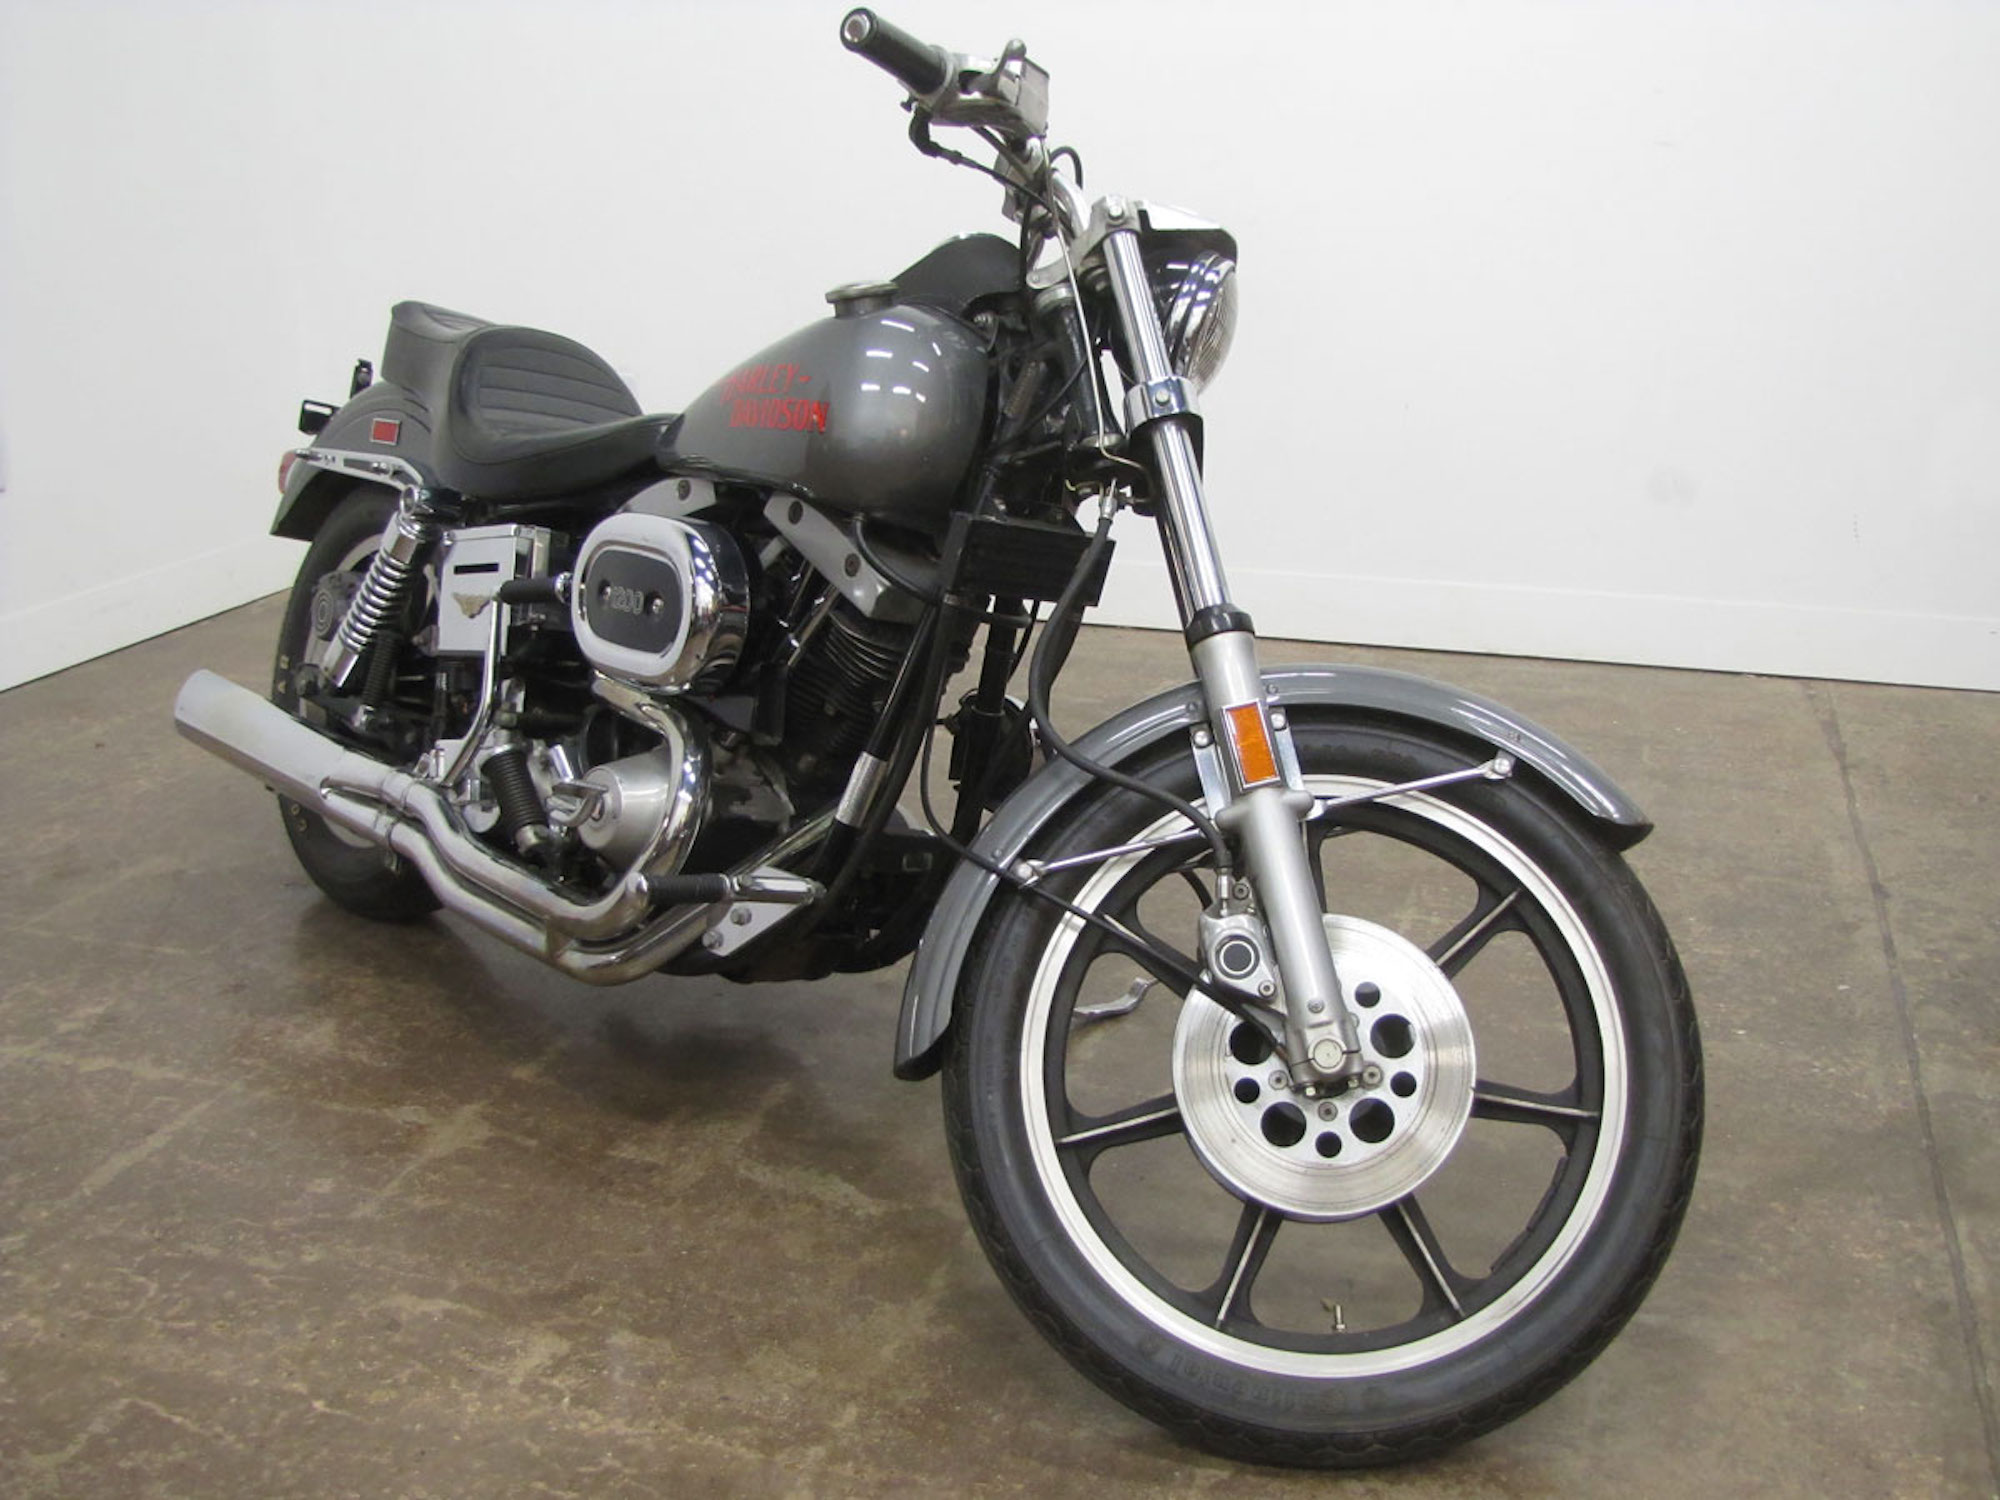 A 1977 Harley-Davidson FXS Low Rider, designed by Willie G. Davidson. Media sourced from the National Motorcycle Museum.